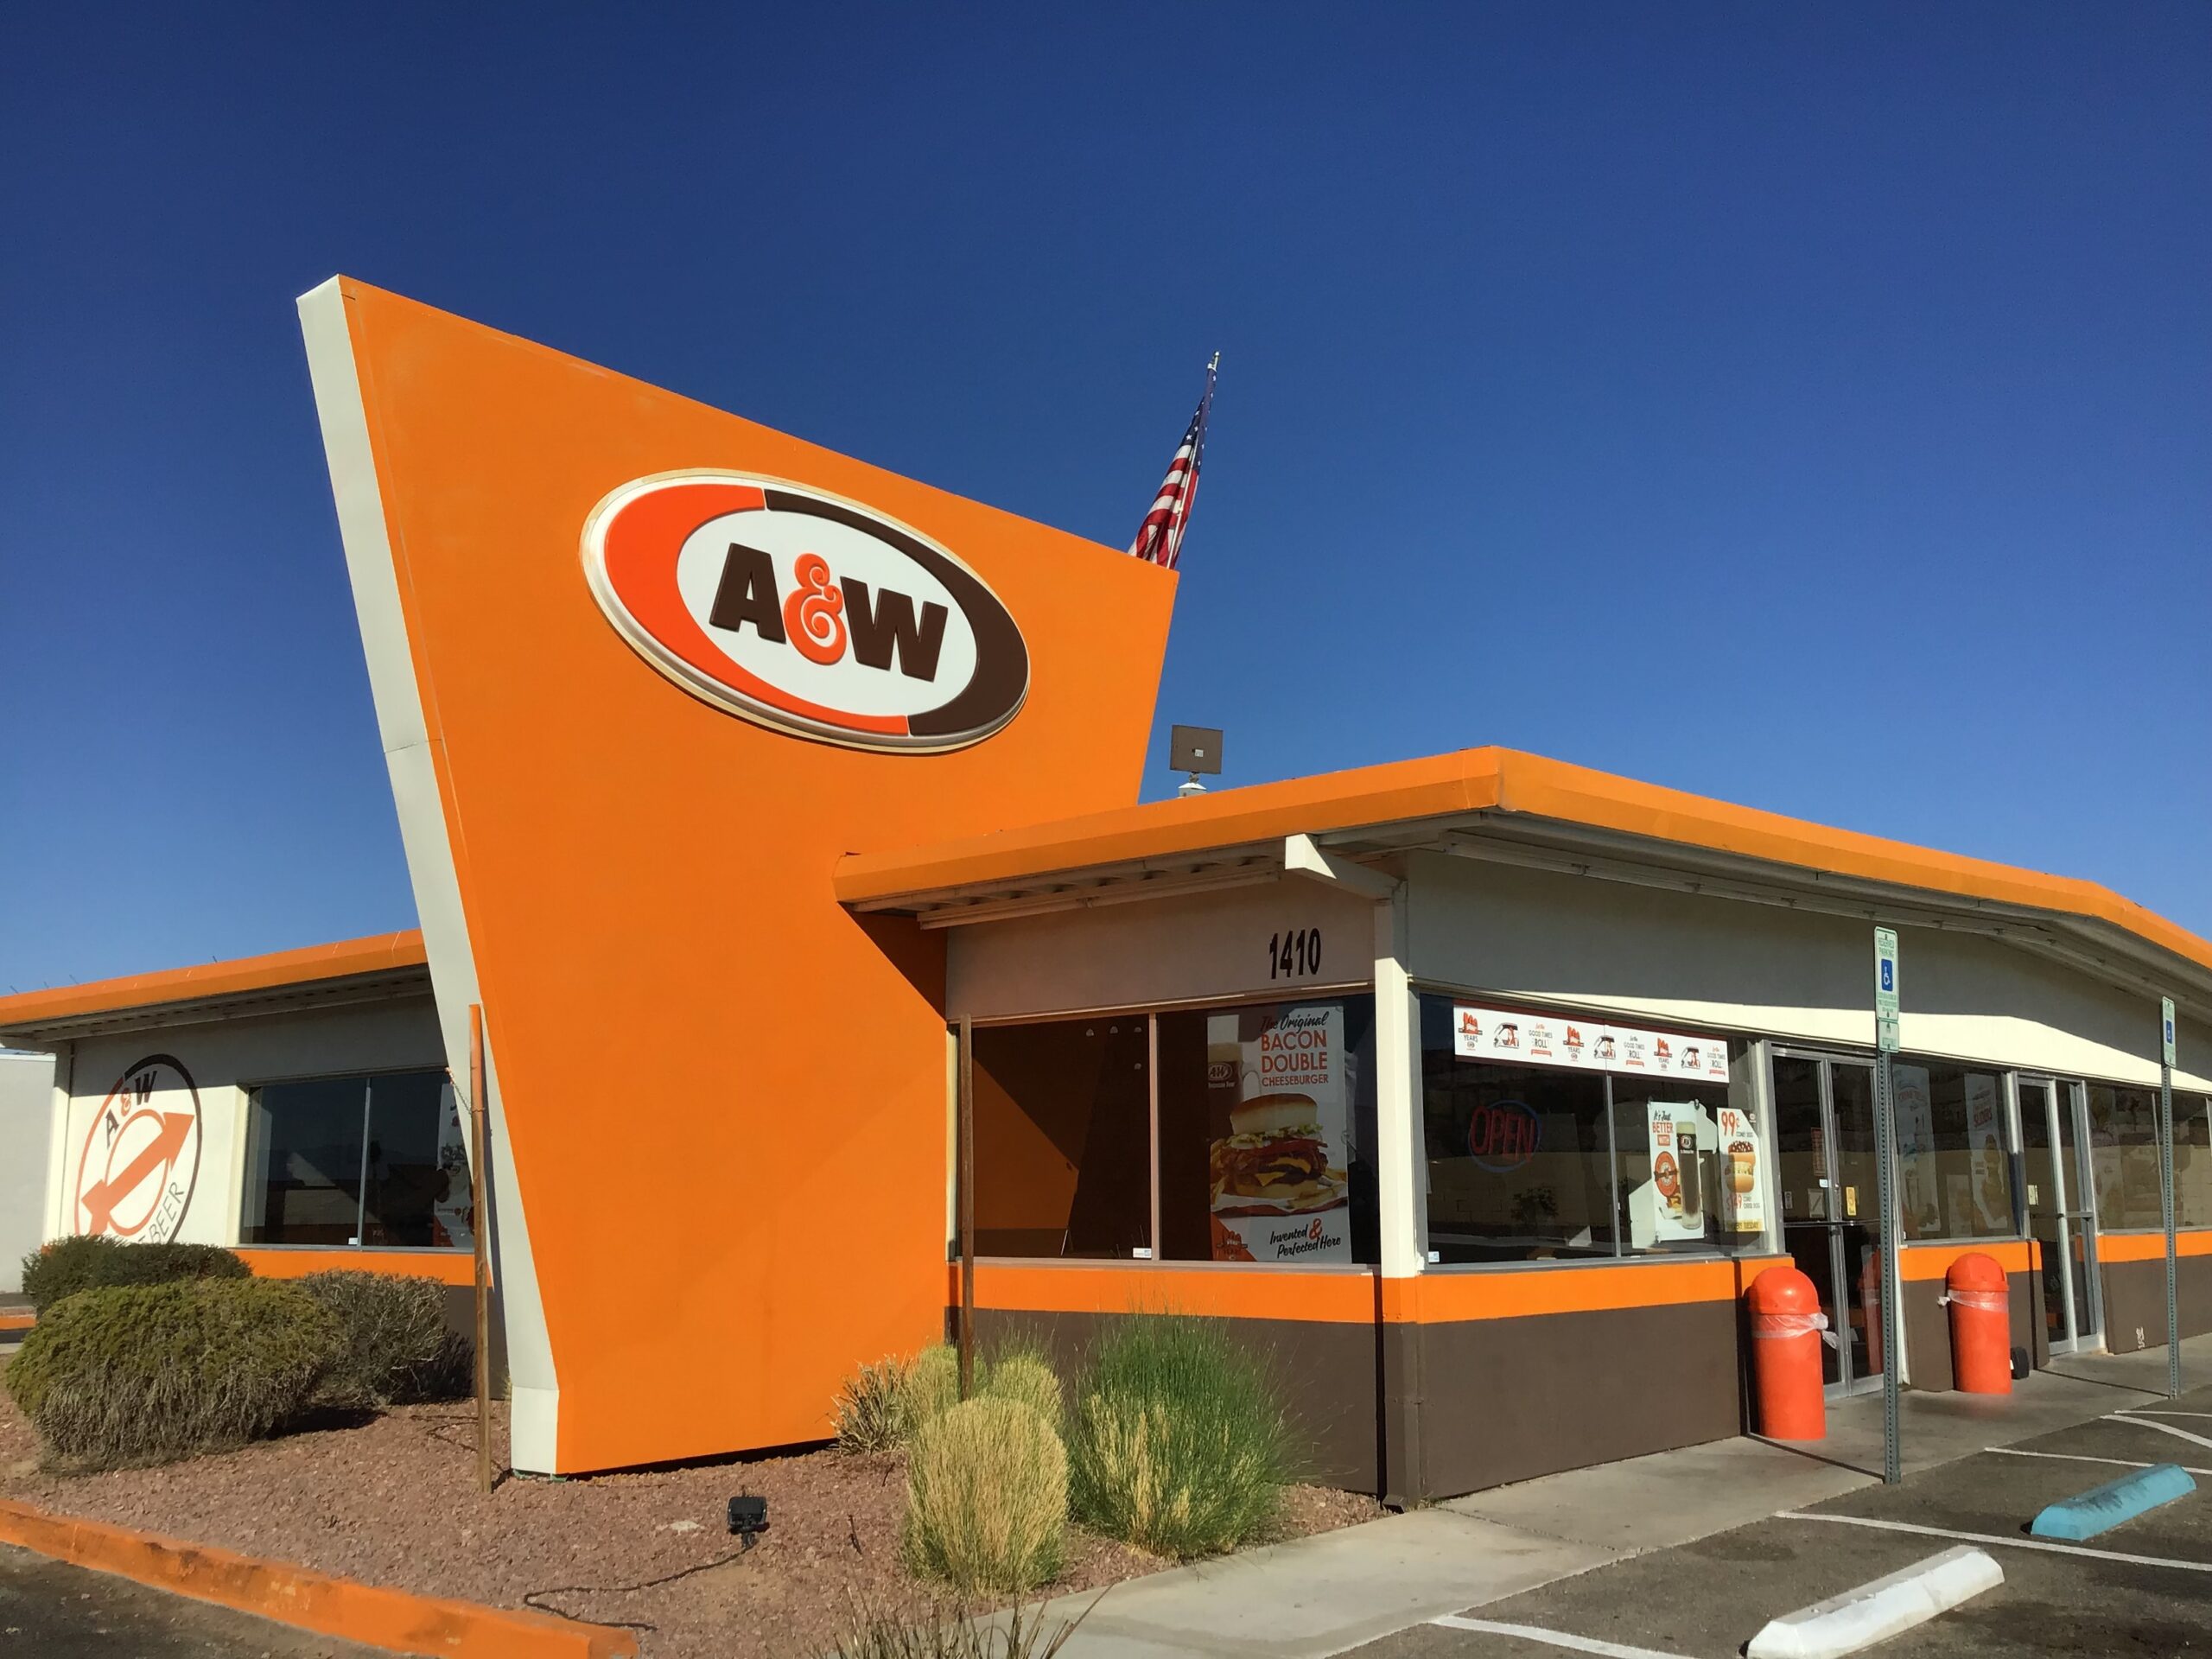 A fast food restaurant with an orange and black sign in the A&W food chain.